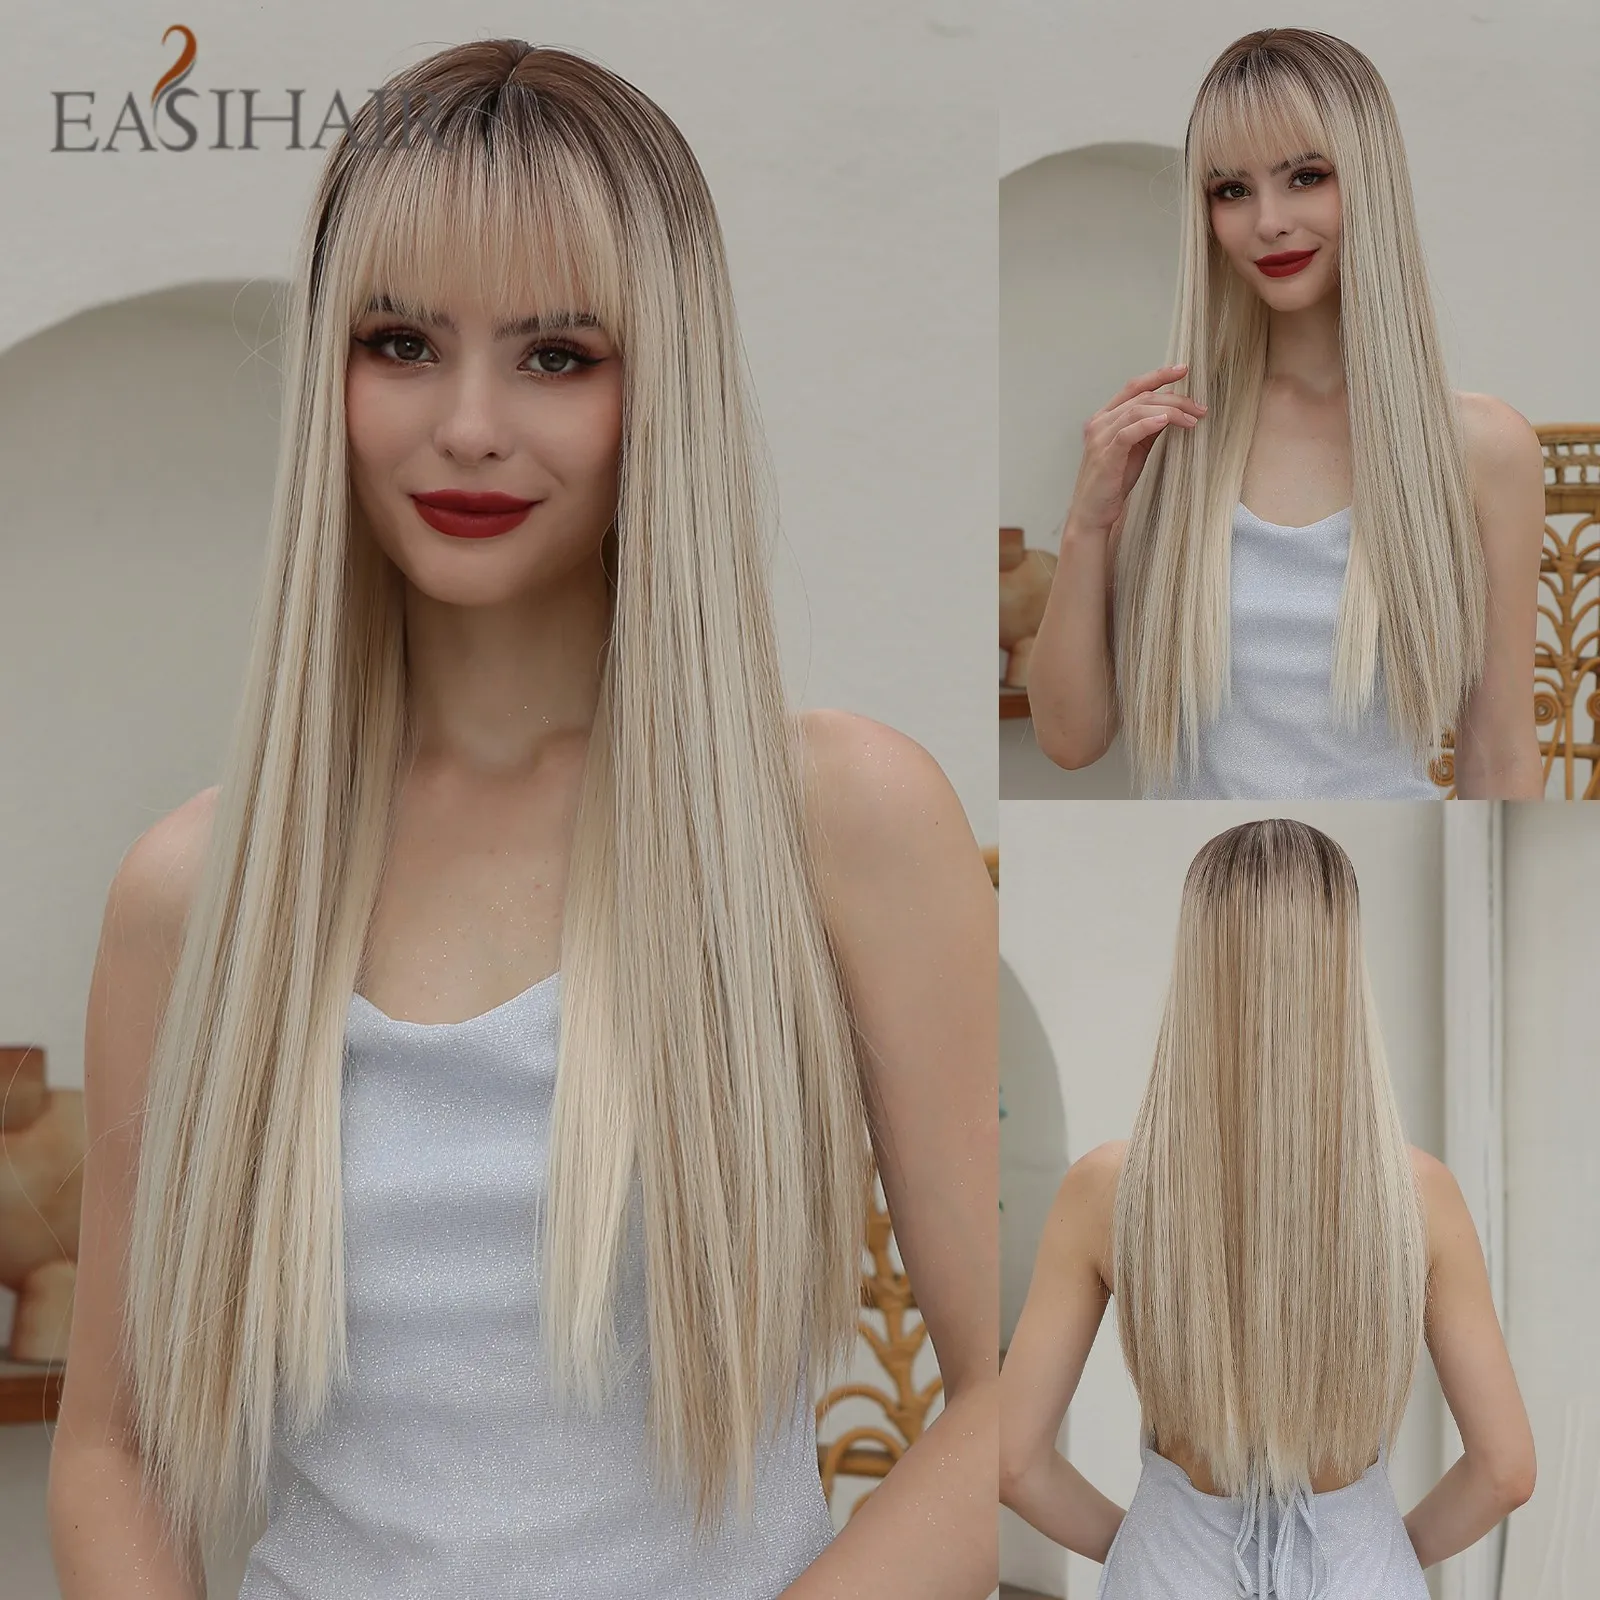 

EASIHAIR Blonde Ombre Synthetic Natural Hair Wigs Long Straight with Bangs Daily Cosplay Wig Heat Resistant Fiber Wigs for Women